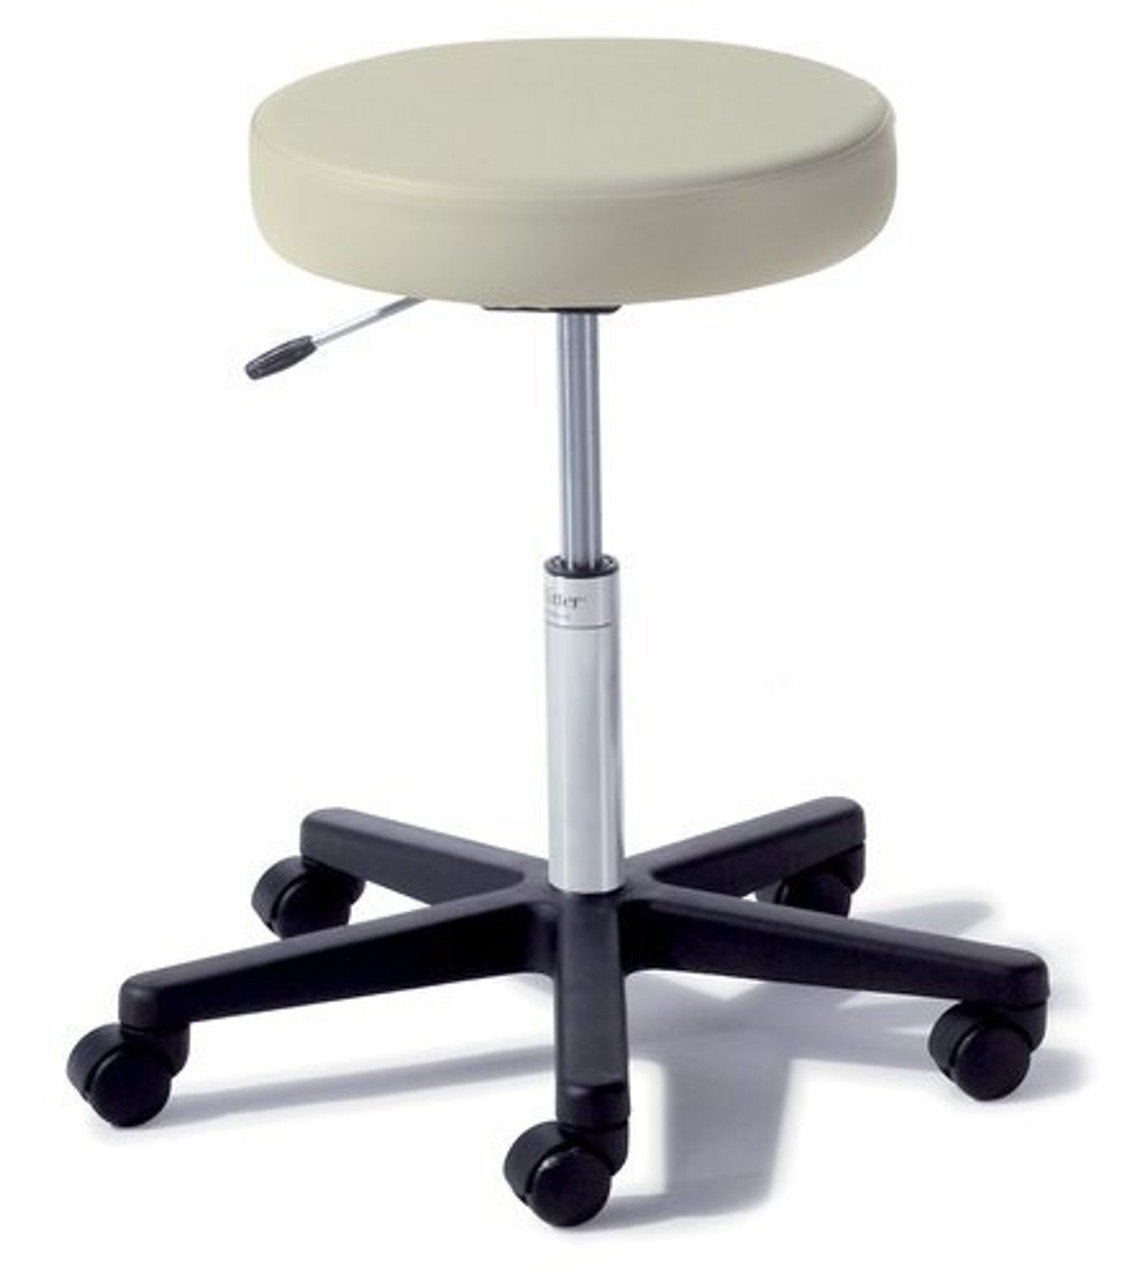 STOOL PHYSICIAN AIR LIFT 5-CASTER** BLK BASE/DUSTY BLUE UPH 144-272-001-233